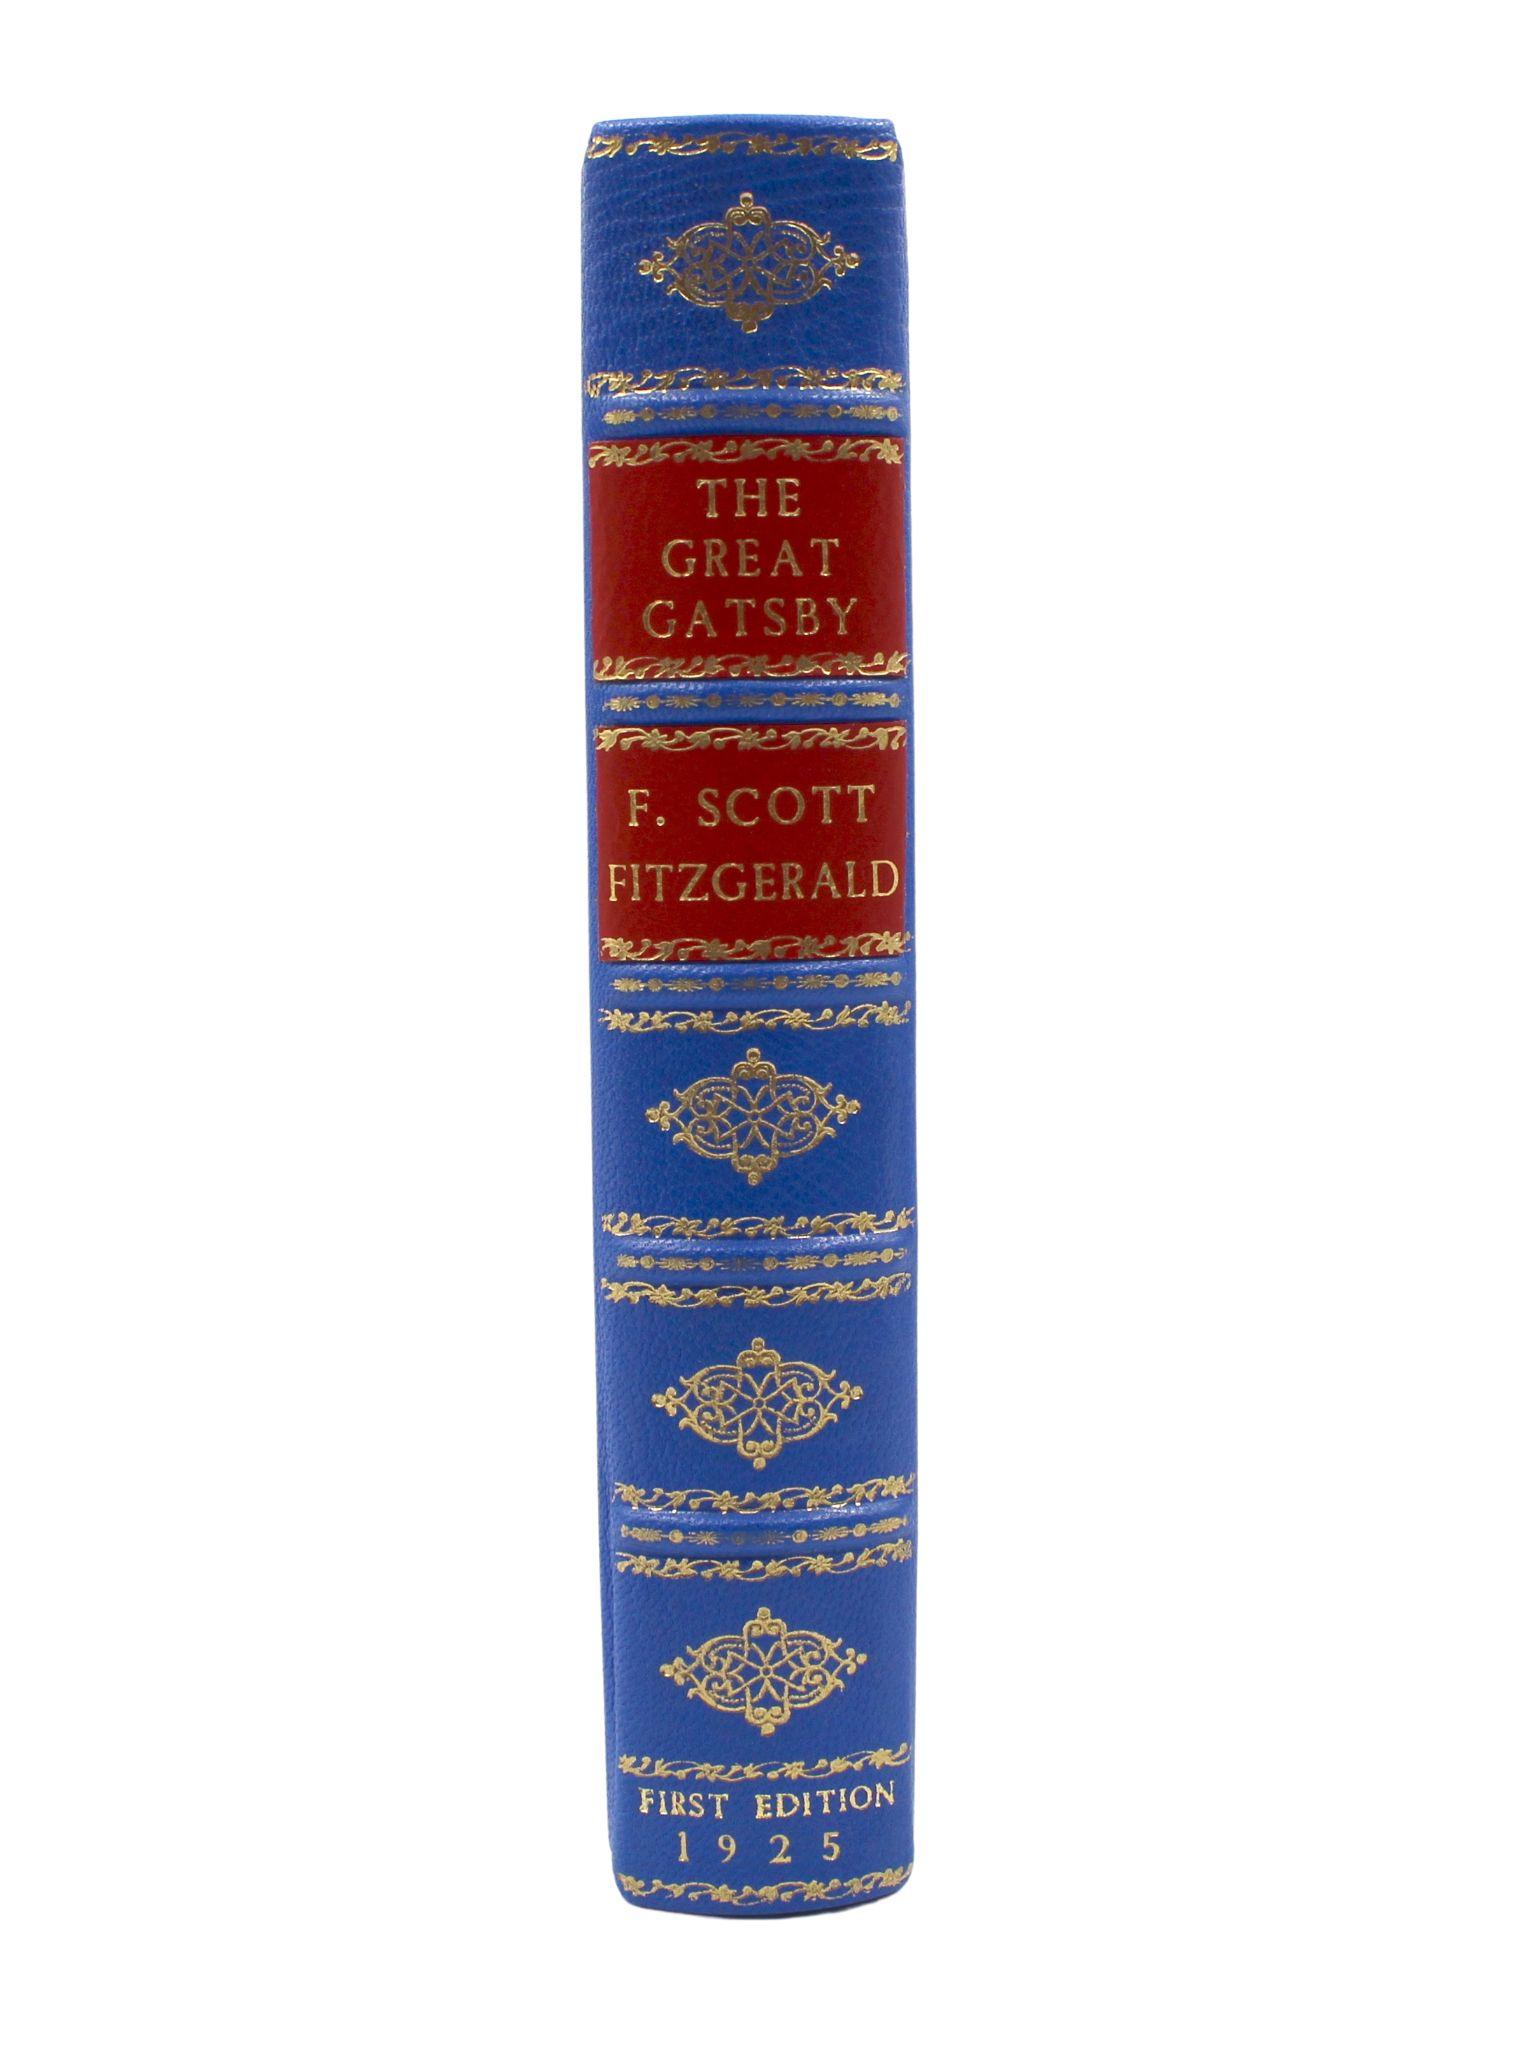 The Great Gatsby by F. Scott Fitzgerald, First Edition, First Issue, 1925 In Good Condition For Sale In Colorado Springs, CO